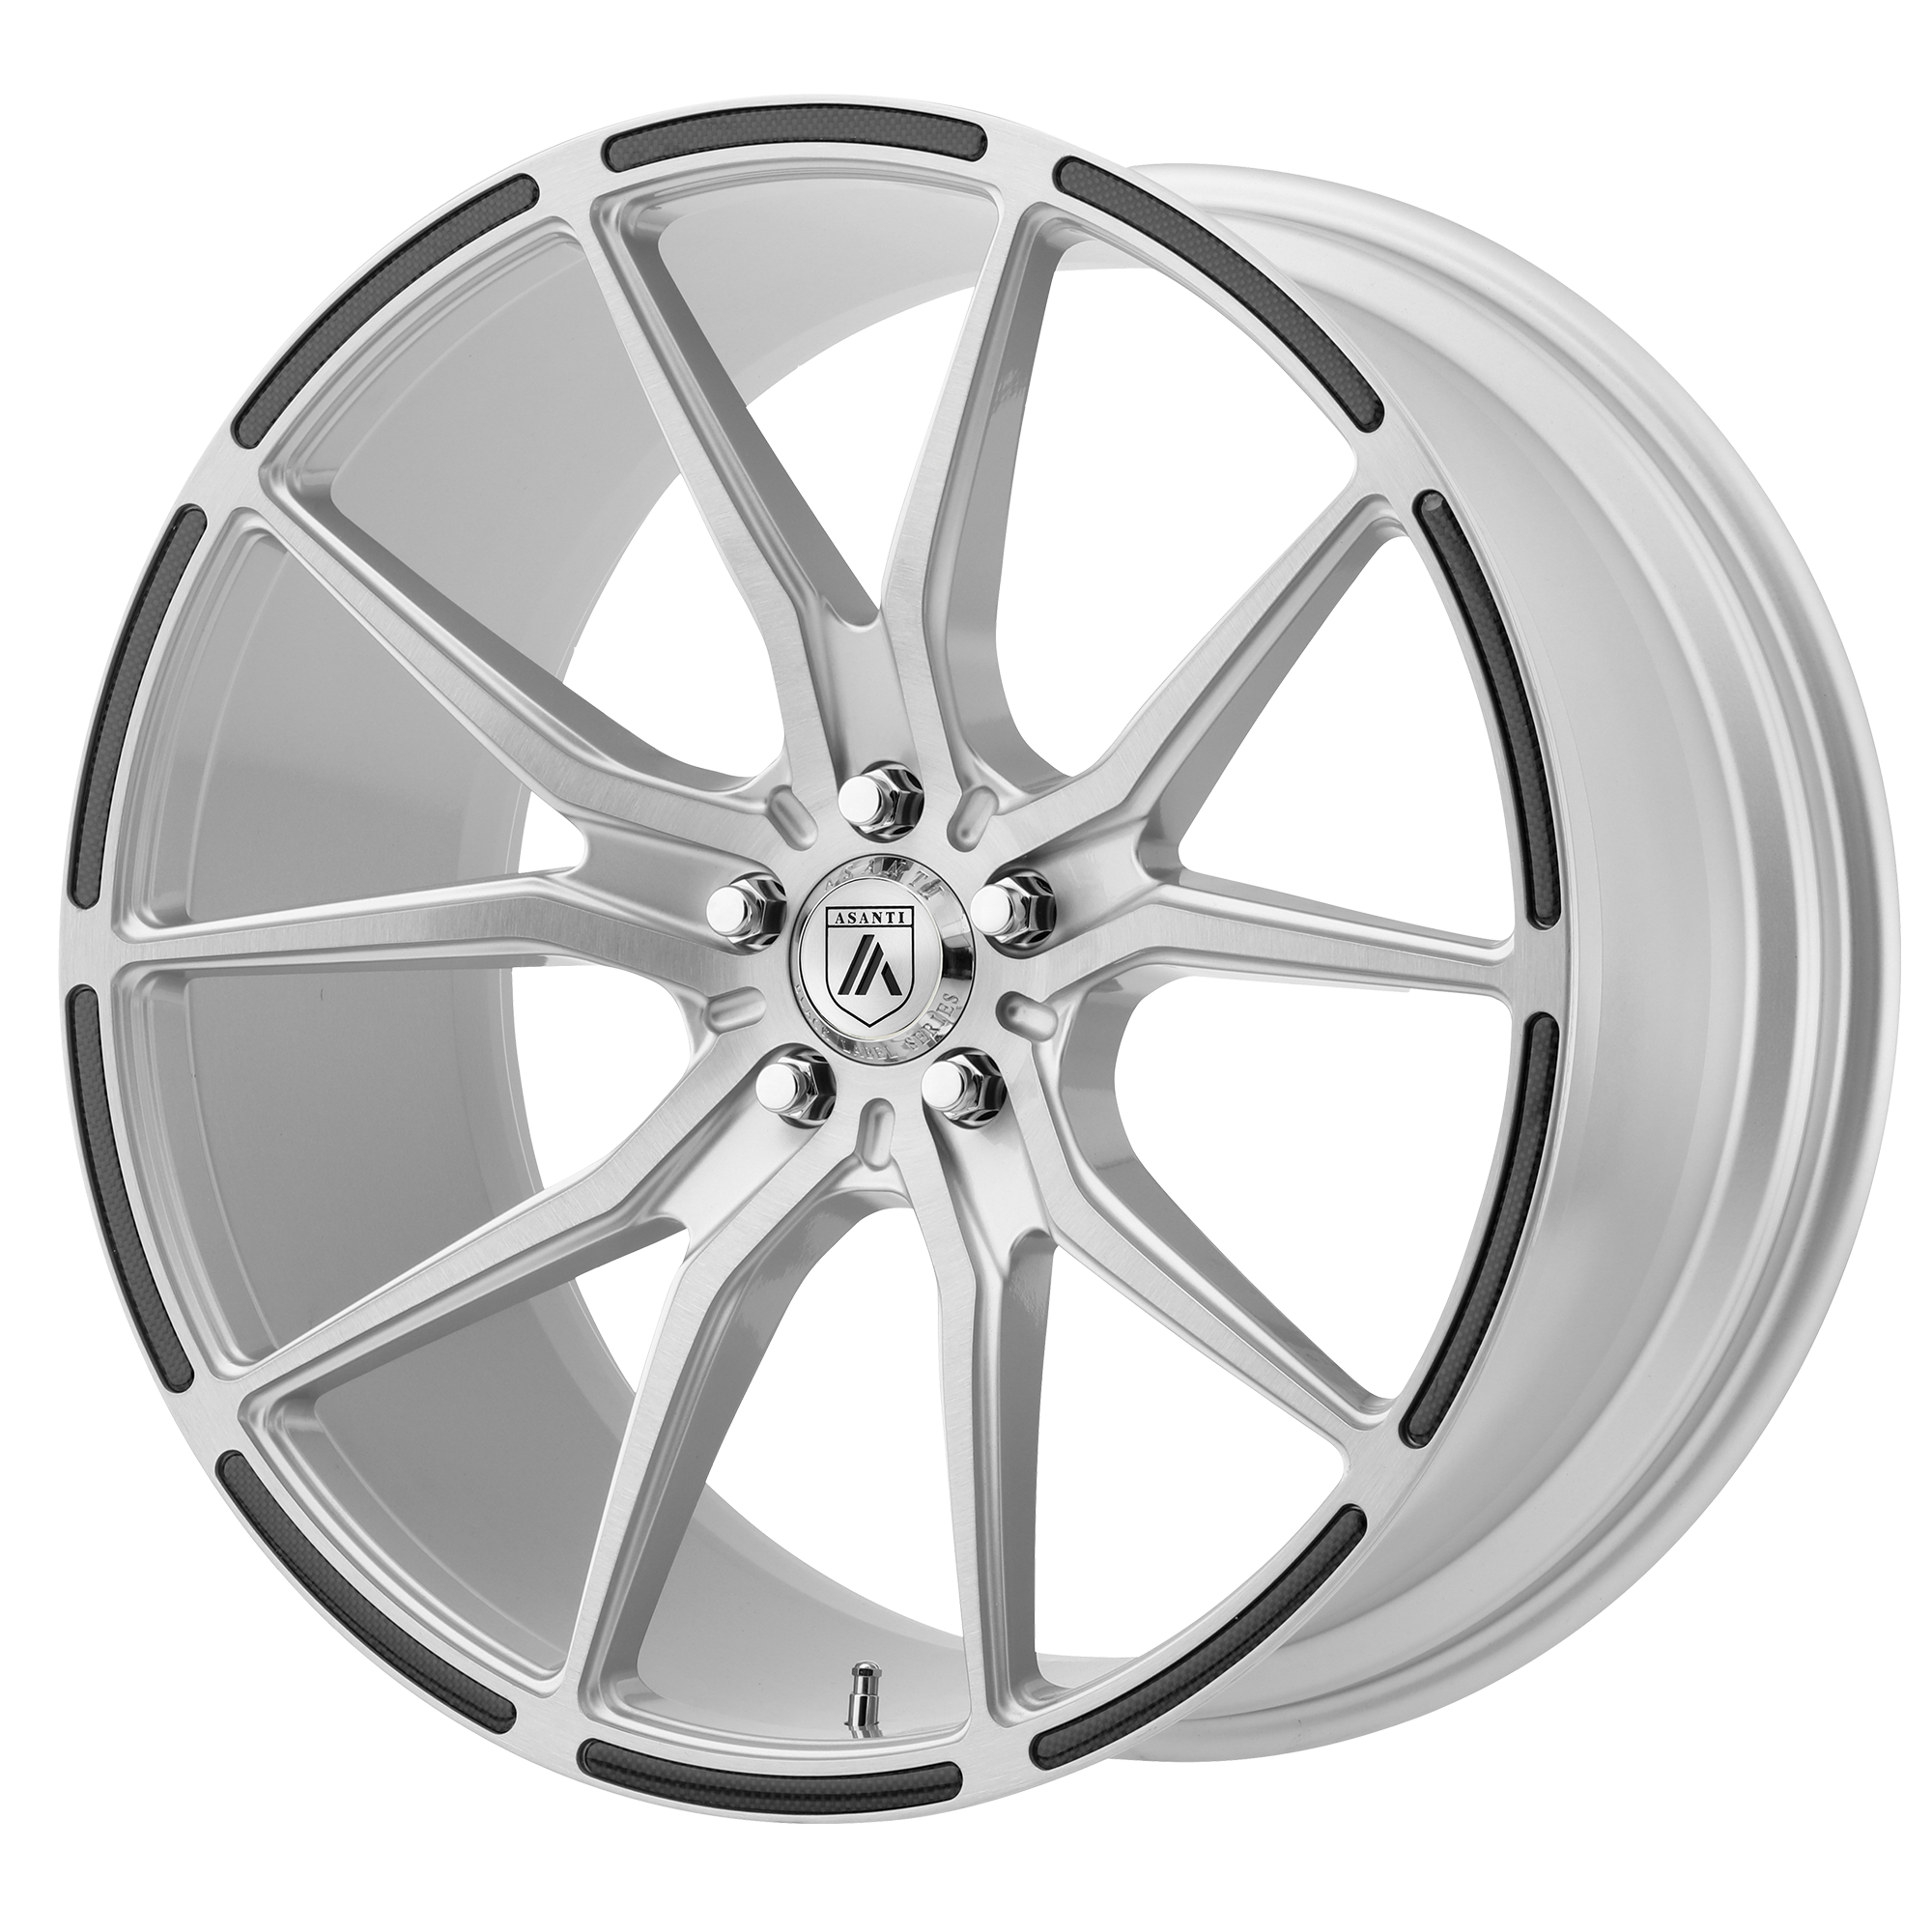 VEGA 20x10.5 5x112.00 BRUSHED SILVER W/ CARBON FIBER INSERTS (38 mm) - Tires and Engine Performance